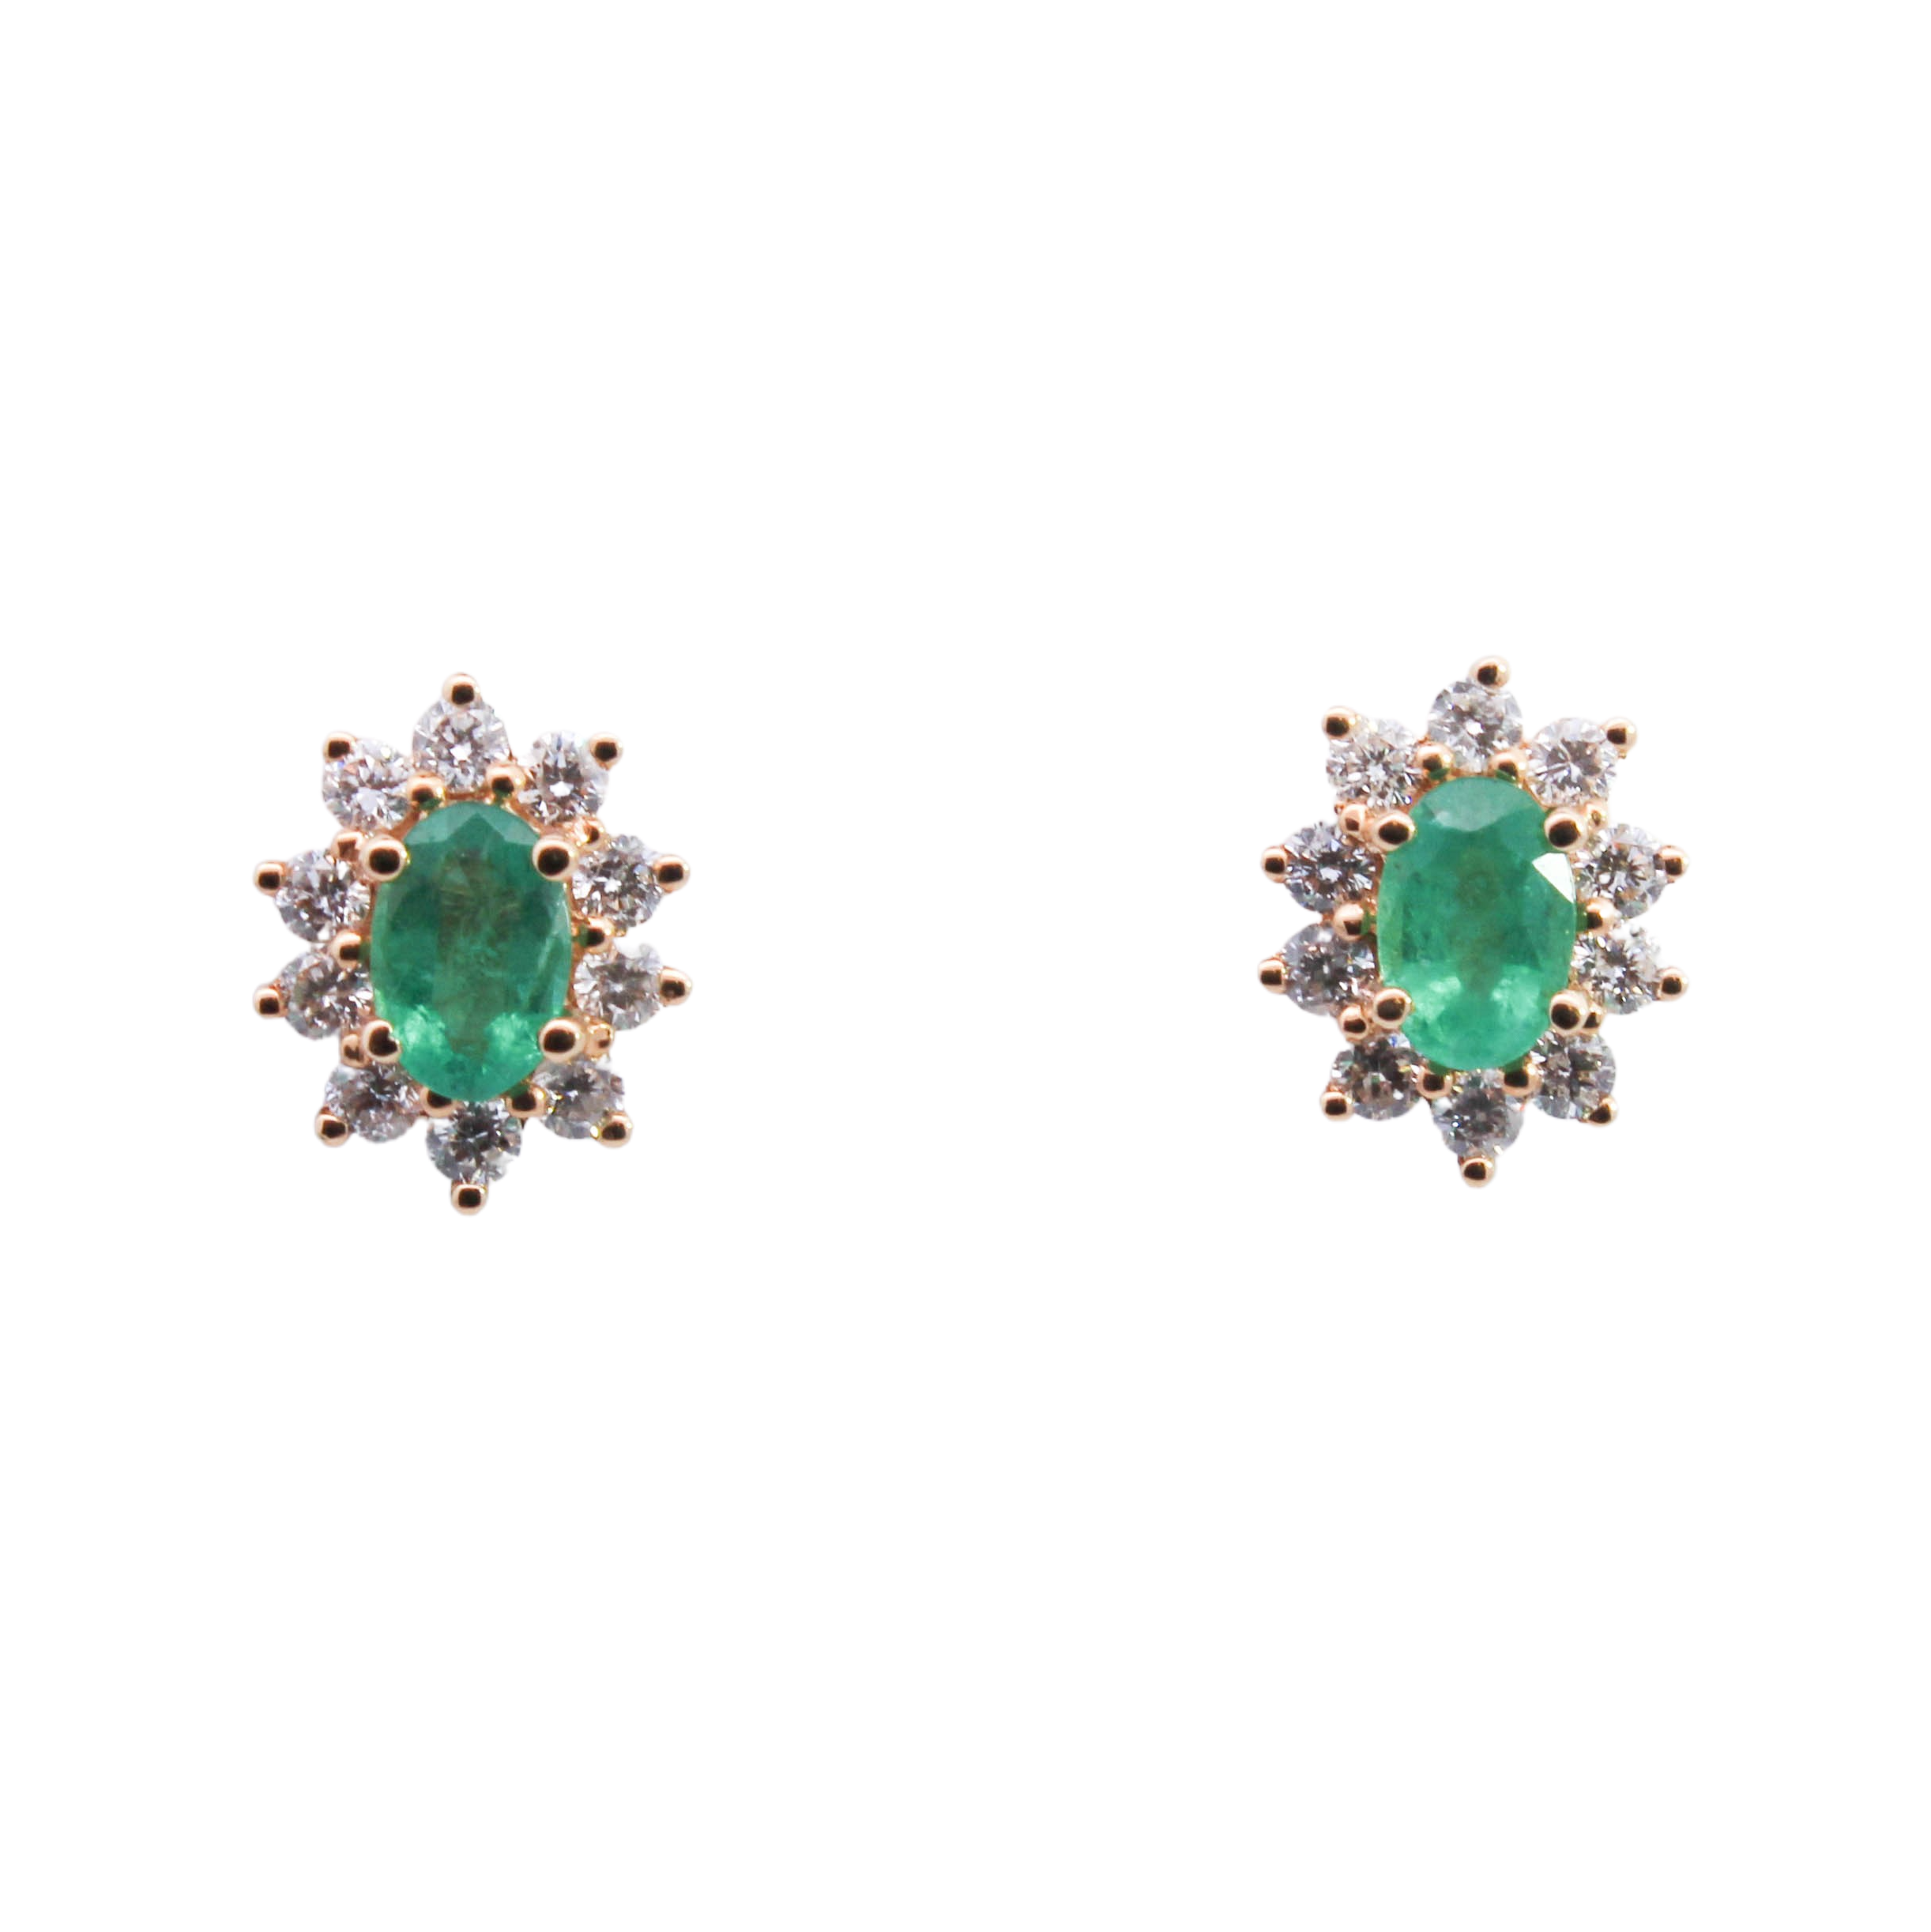 emerald-earrings-cape-town-south-africa